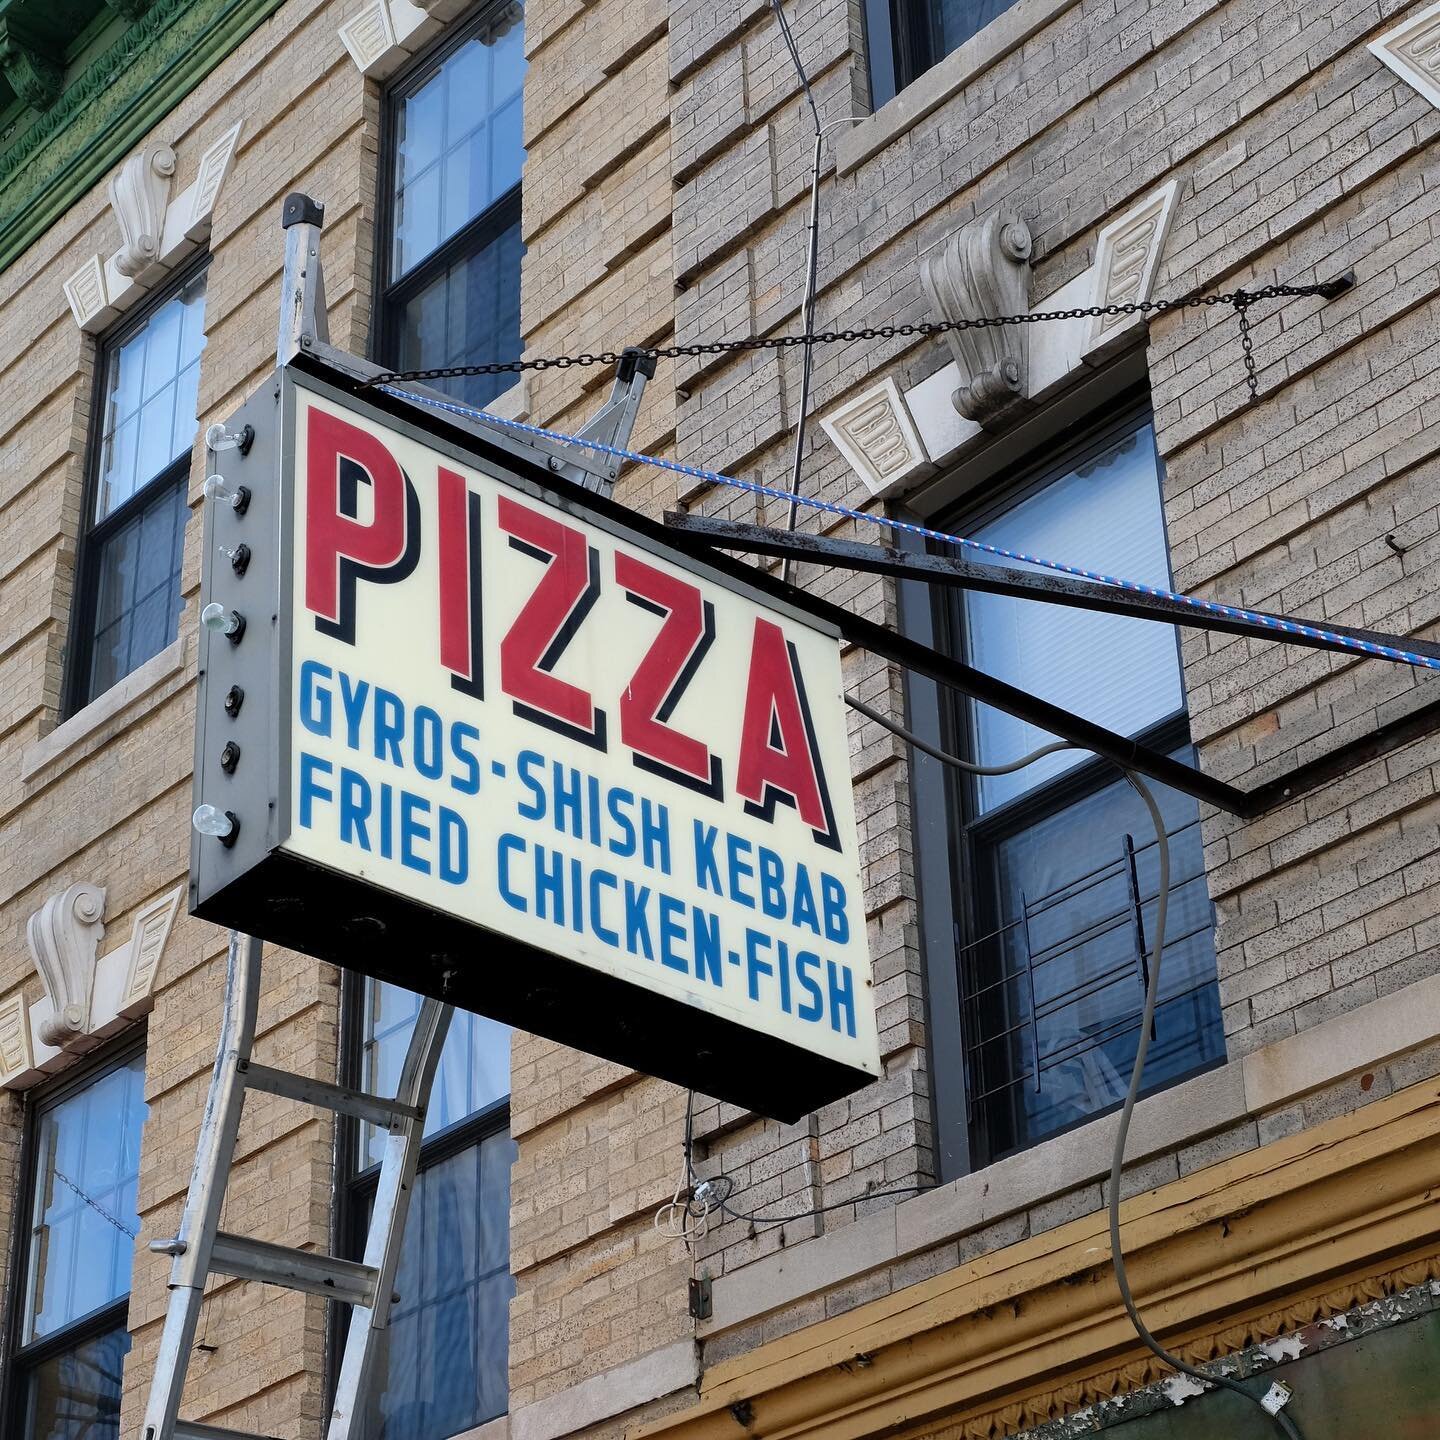 Can&rsquo;t believe we&rsquo;ve been collecting old signs for several years and it wasn&rsquo;t until last summer that we acquired our first-ever pizza sign! Saving these old signs can sometimes feel like a pursuit of pie in the sky, but whenever you